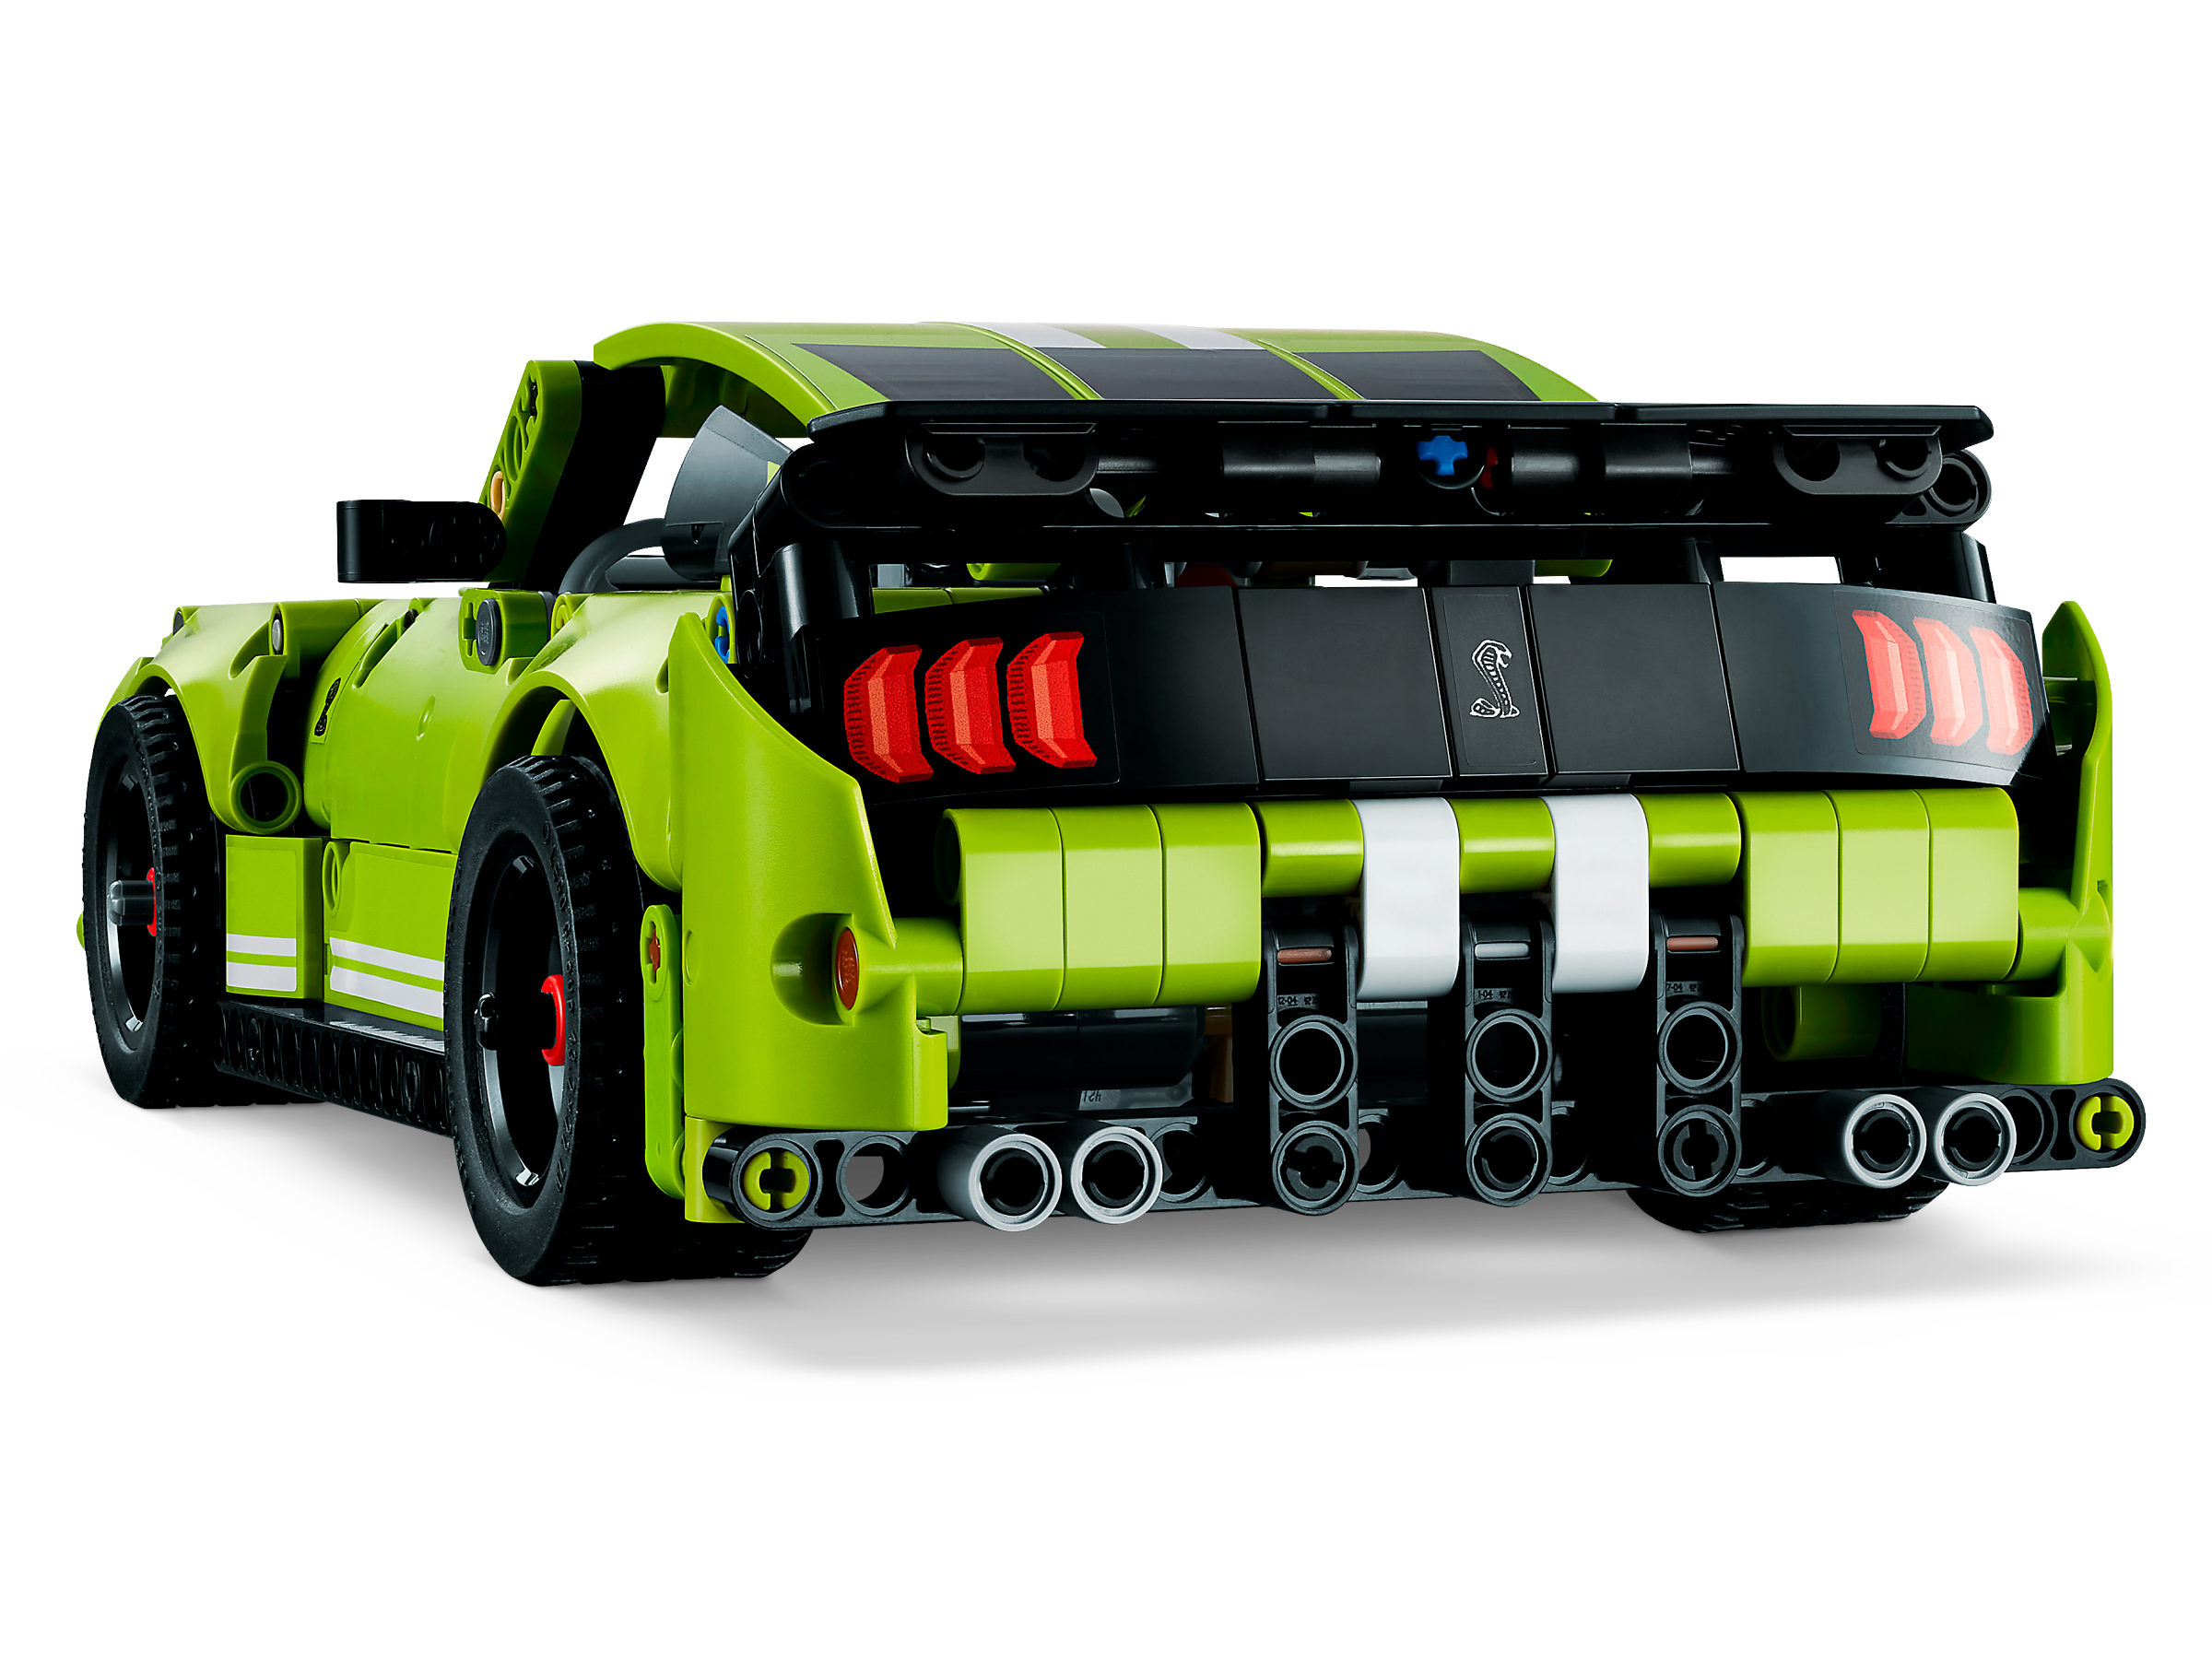 Lego Technic Ford Mustang Shelby Gt500 Ar Race Car Toy 42138 : Target